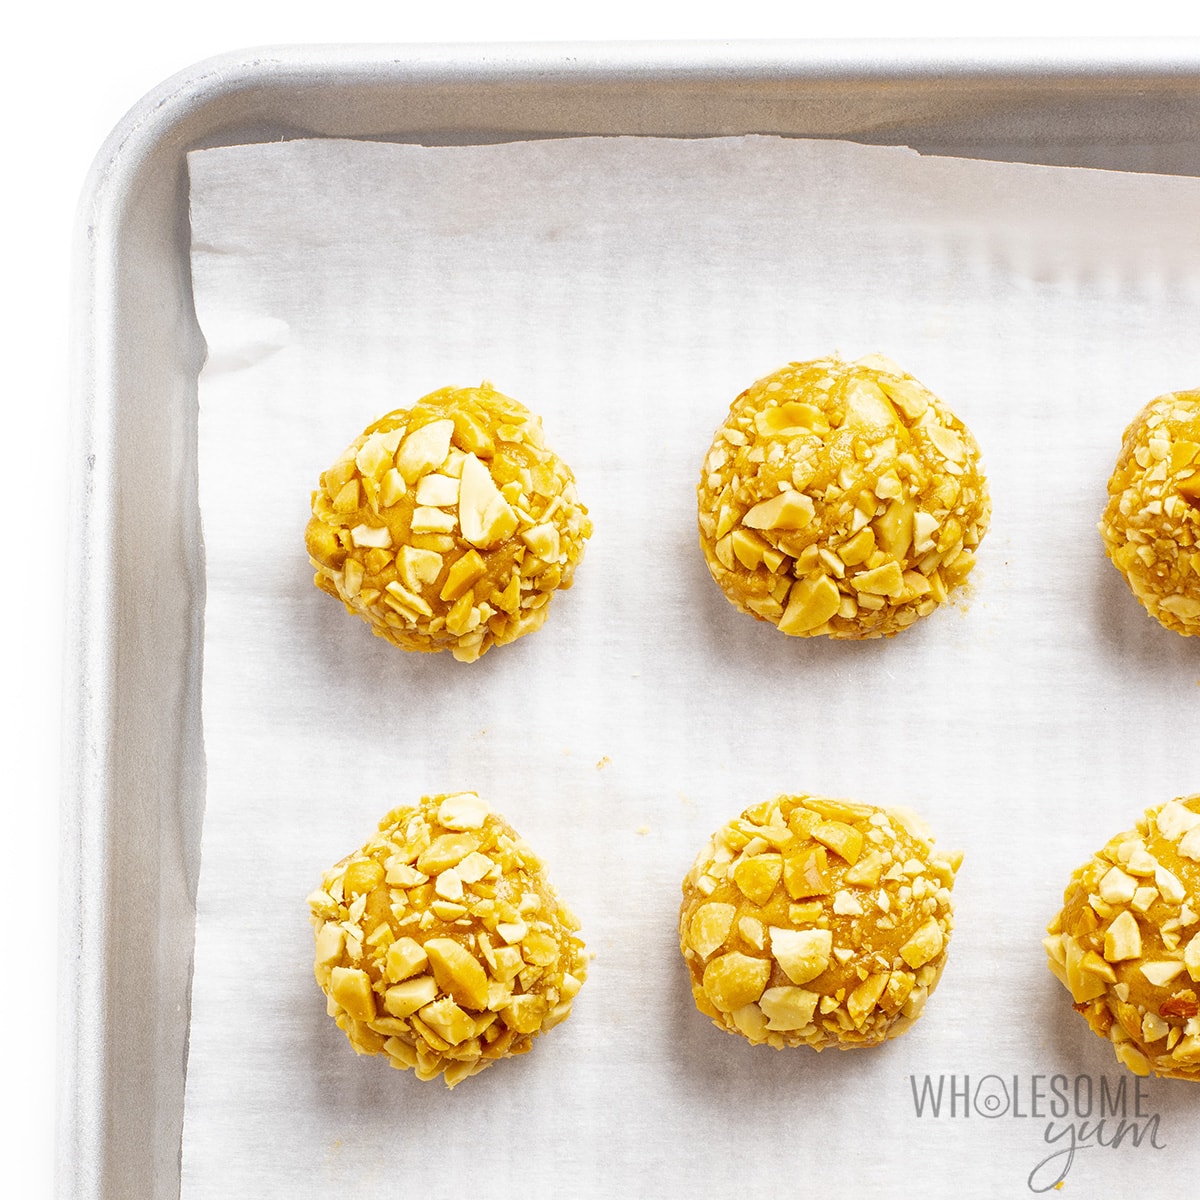 Finished no bake protein balls on a baking sheet.